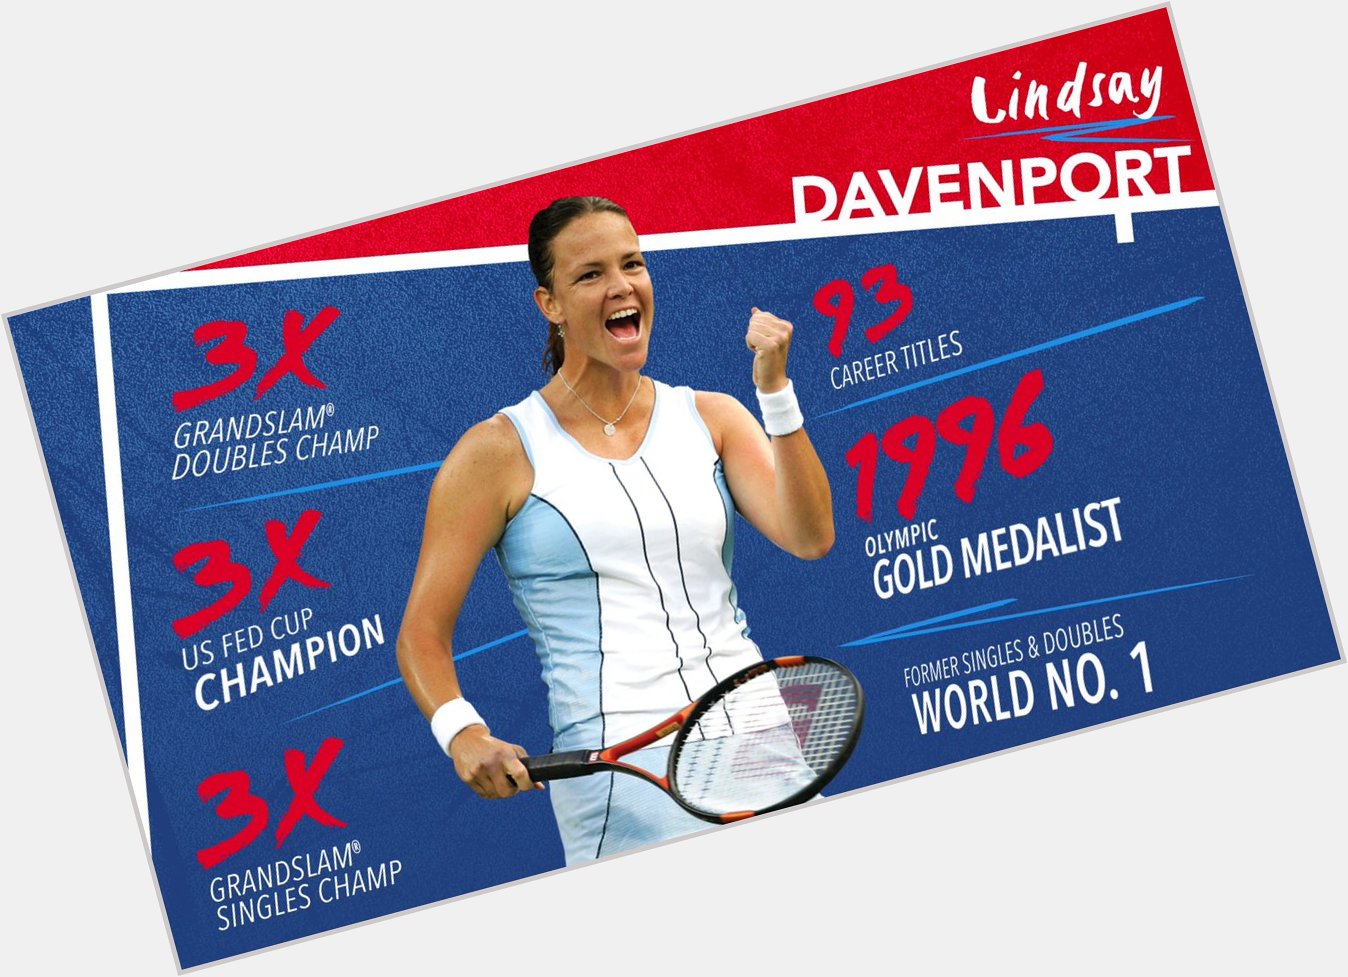 What a career from Lindsay Davenport!   Happy Birthday, Lindsay! 